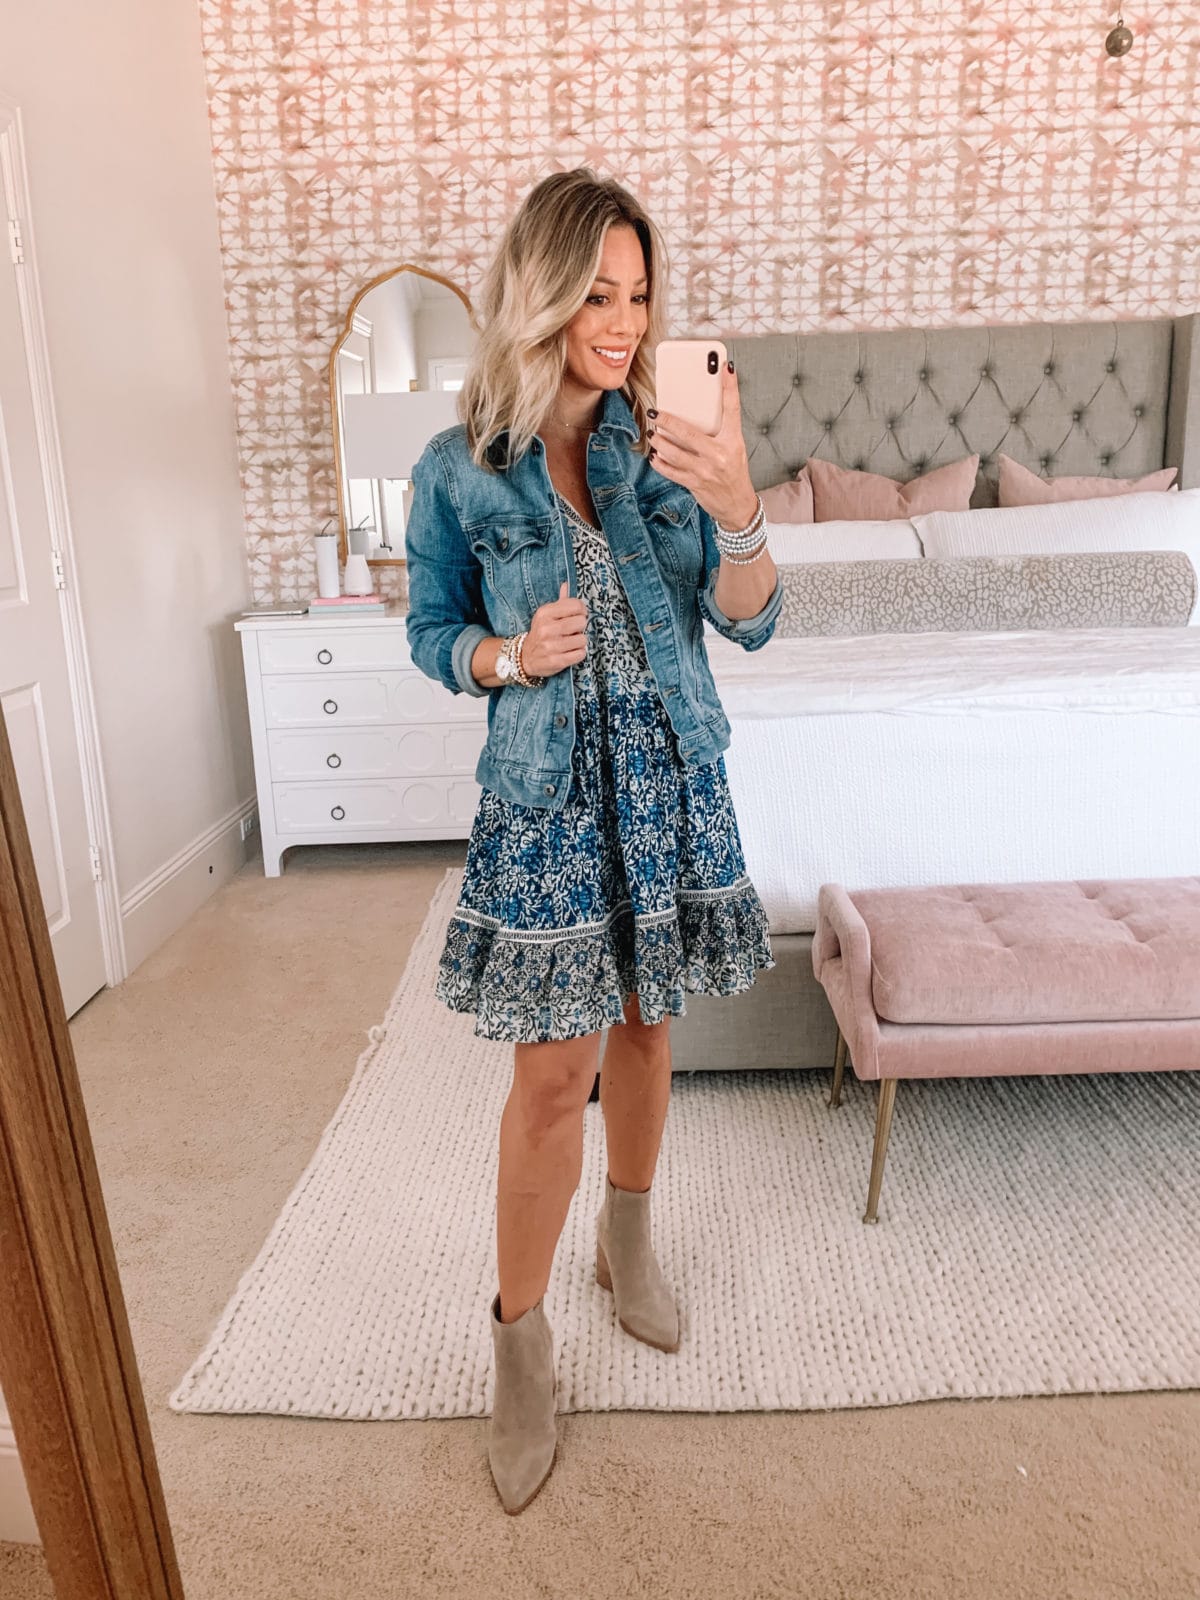 Red Dress Fashion Finds, Blue Floral Dress, Booties, Jean Jacket